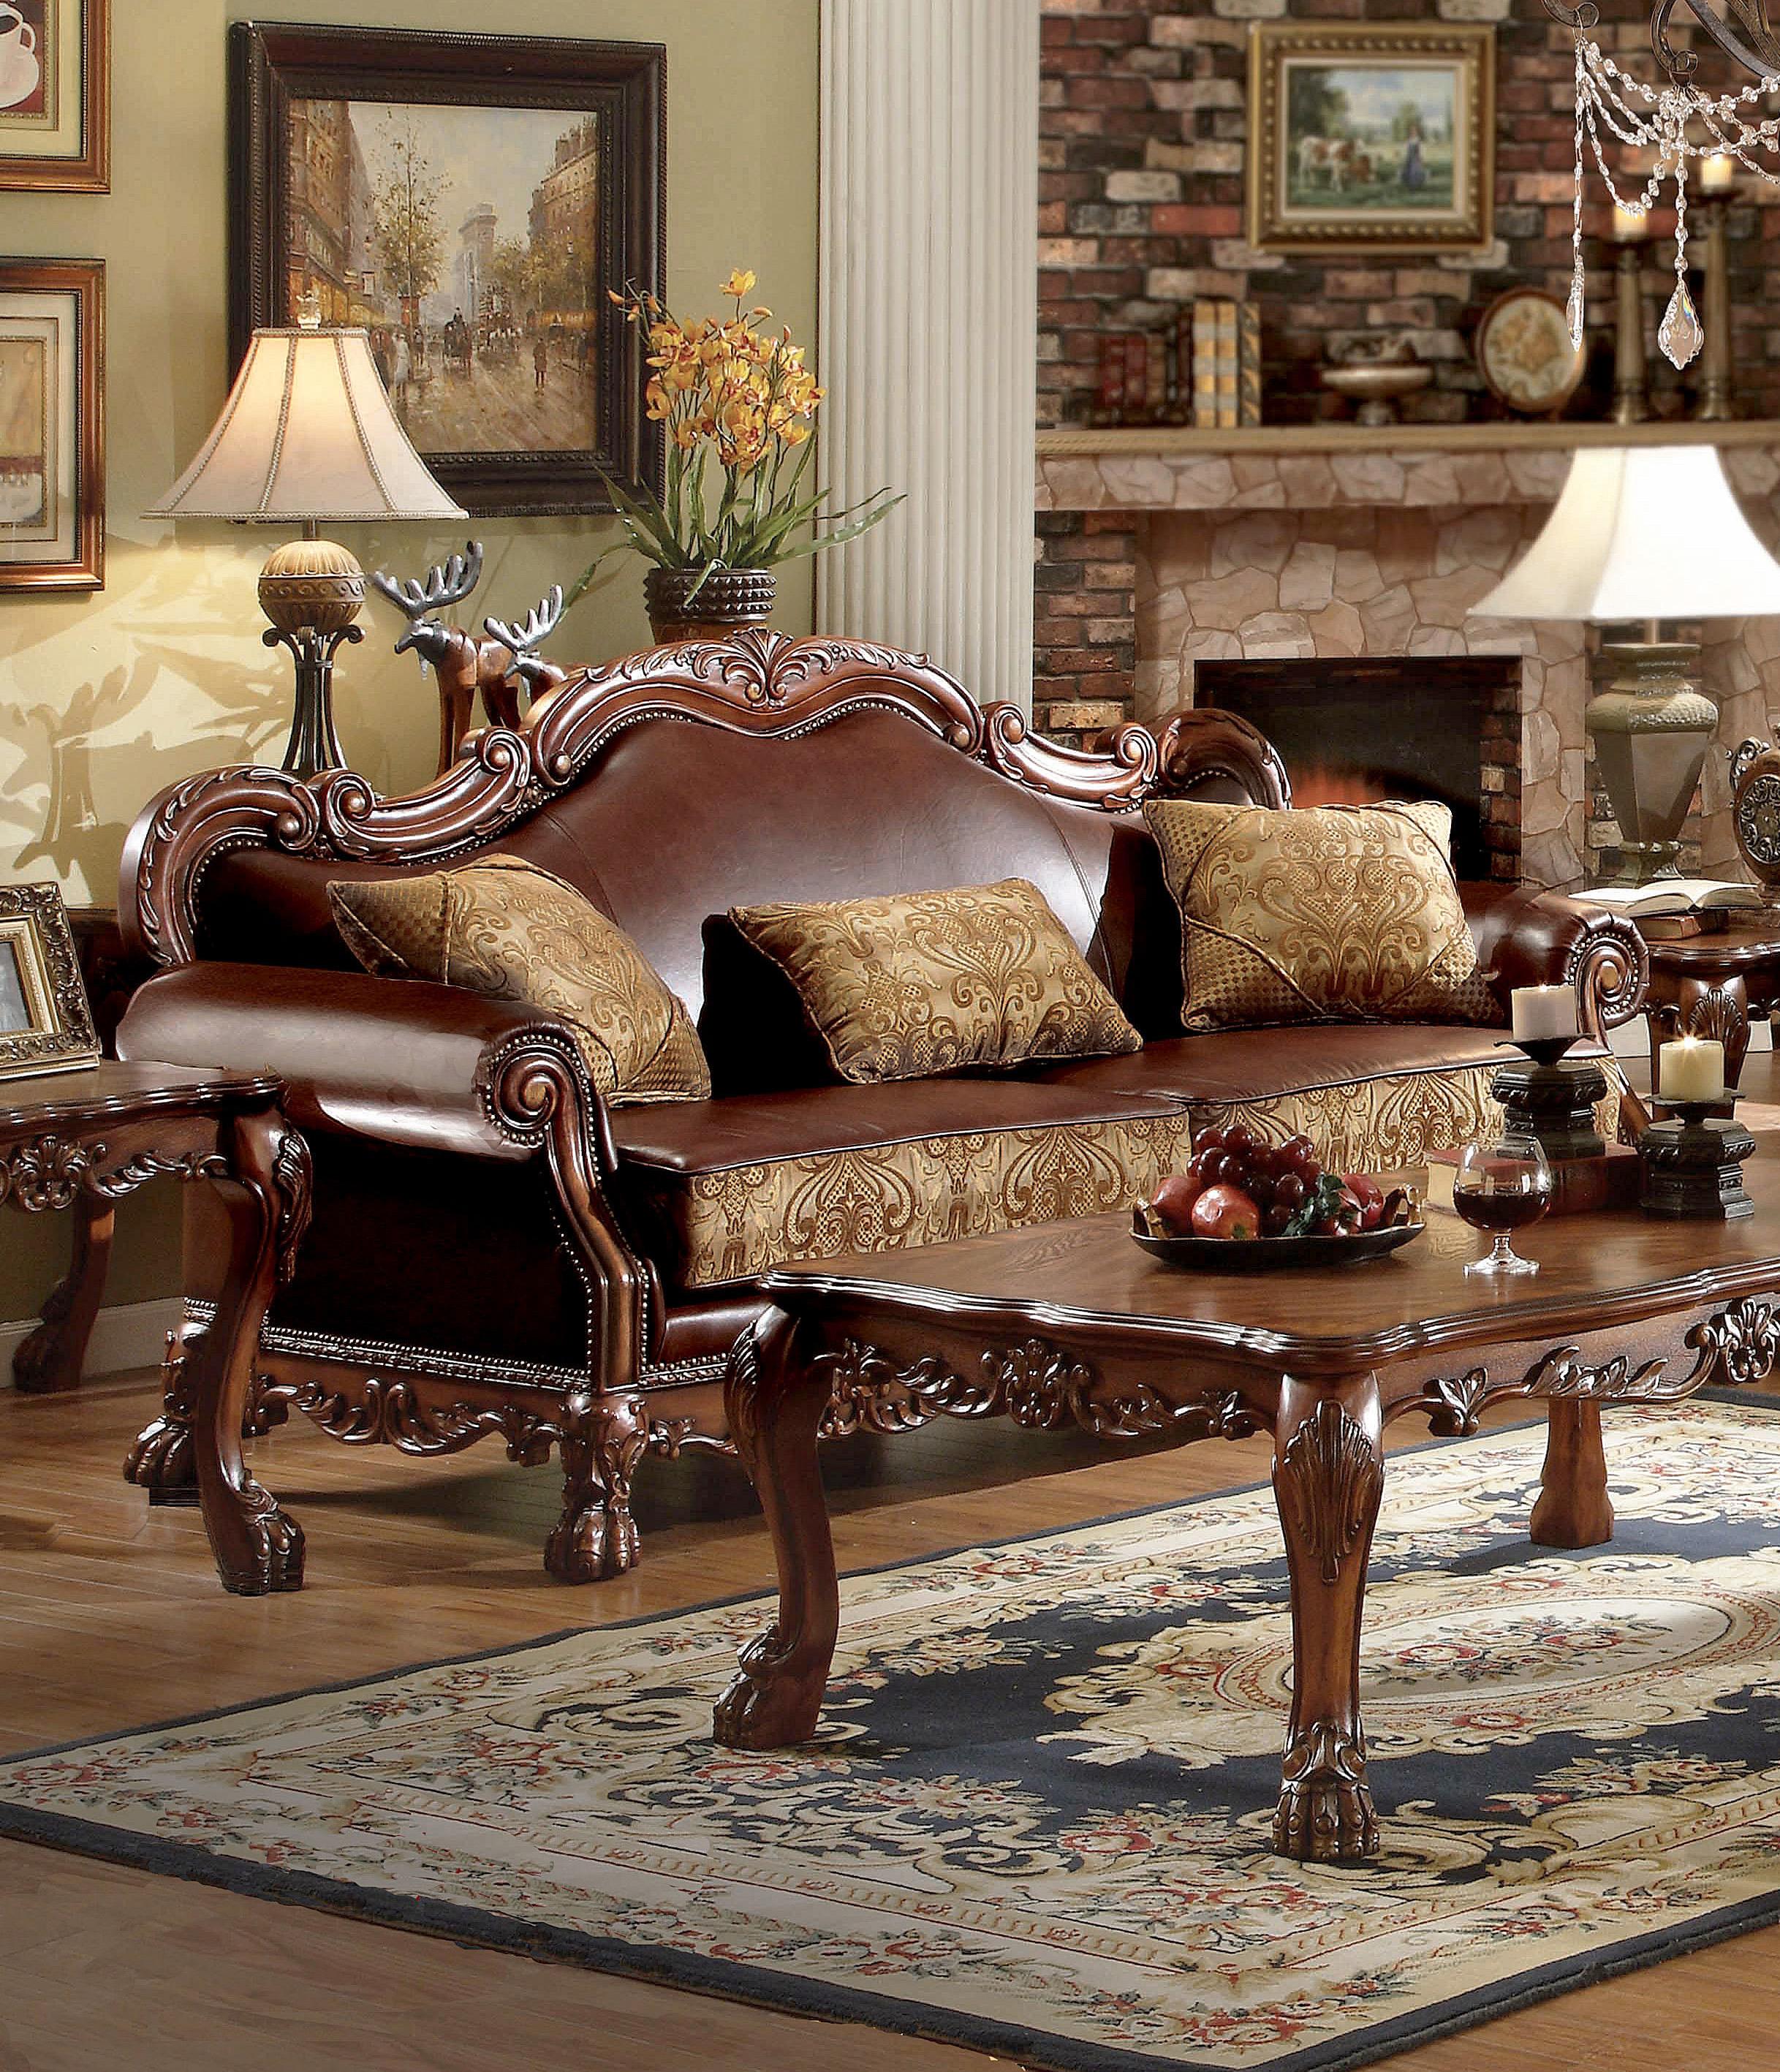 Traditional,  Vintage Sofa Dresden-15160 Dresden-15160 in Oak, Cherry, Brown Faux Leather